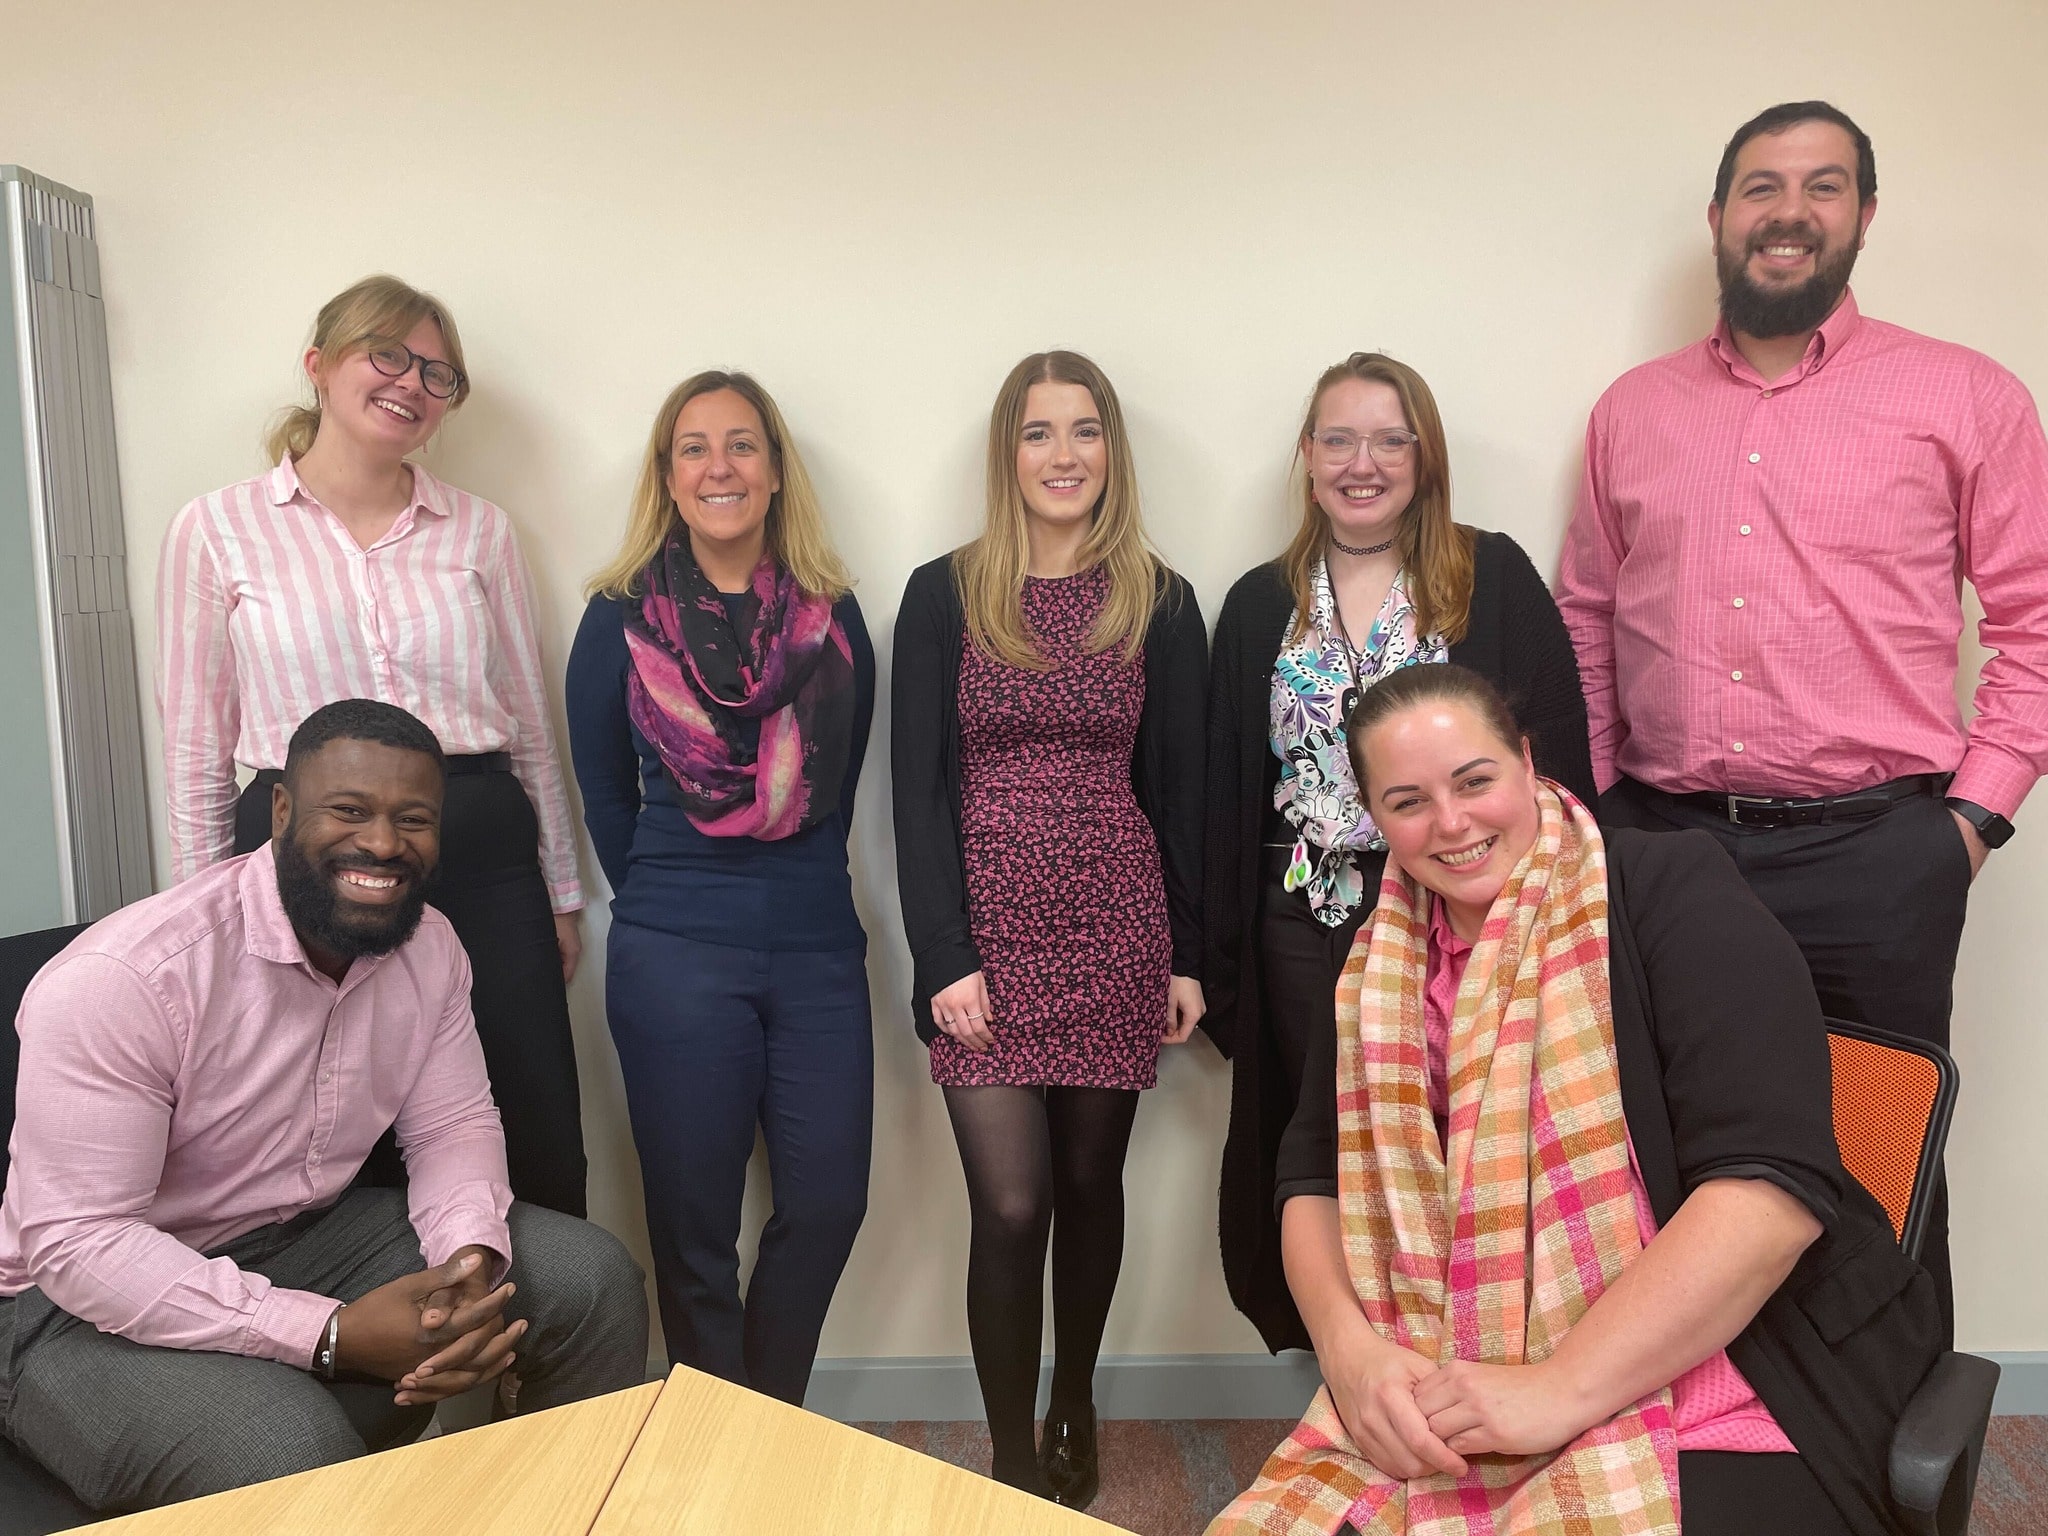 The JDR team standing together wearing pink for breast cancer awareness day and fundraising